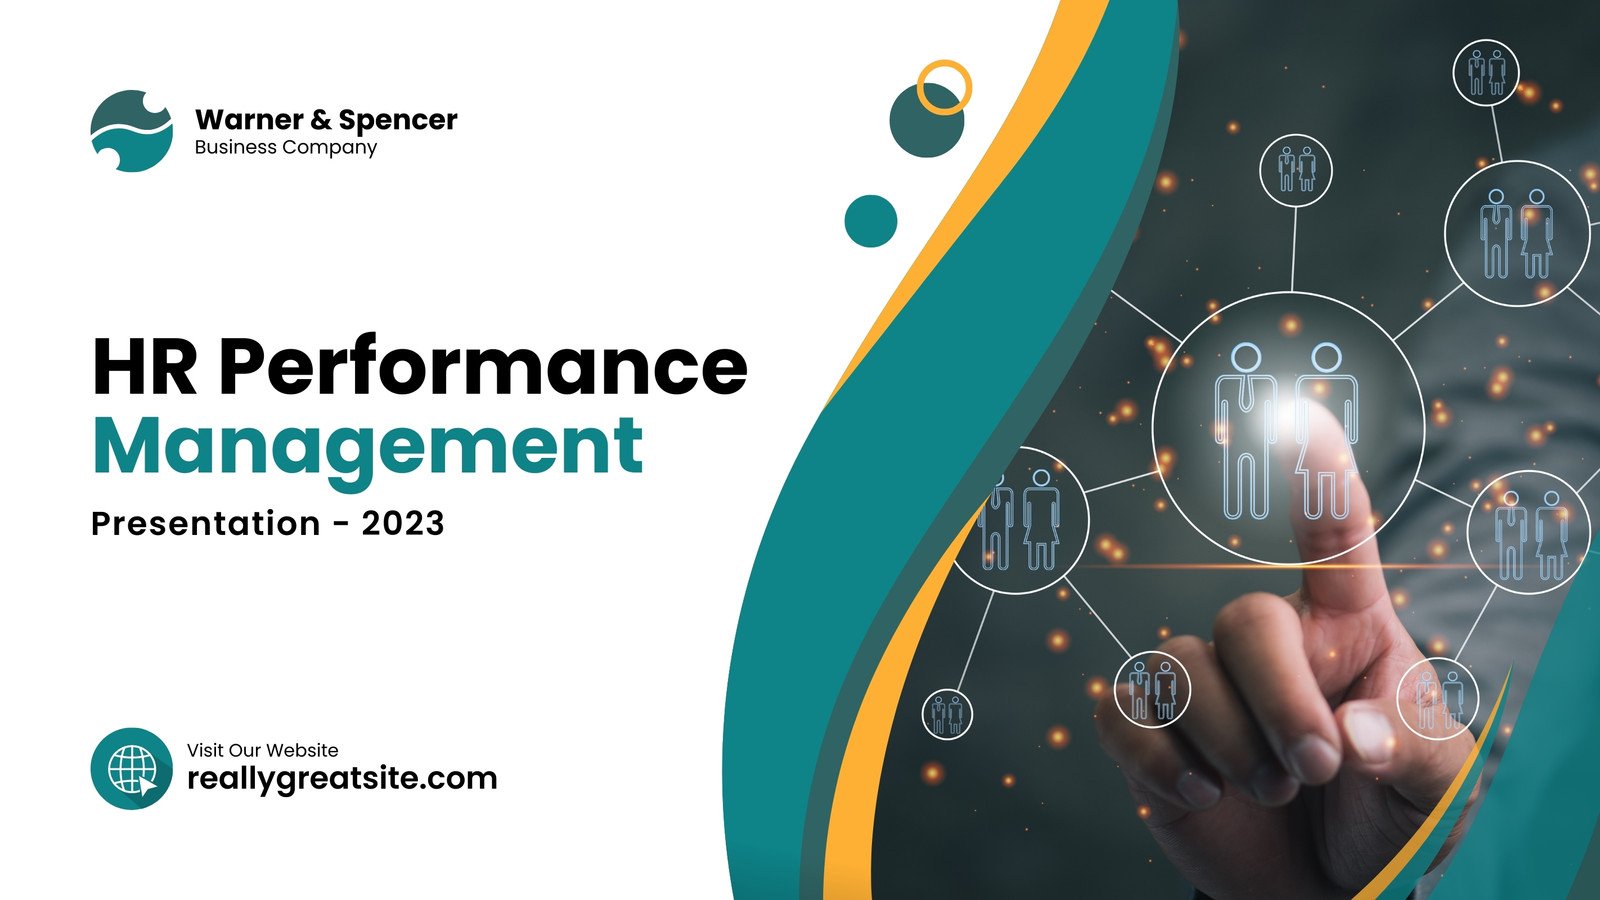 White And Teal Modern Professional HR Performance Management Presentation